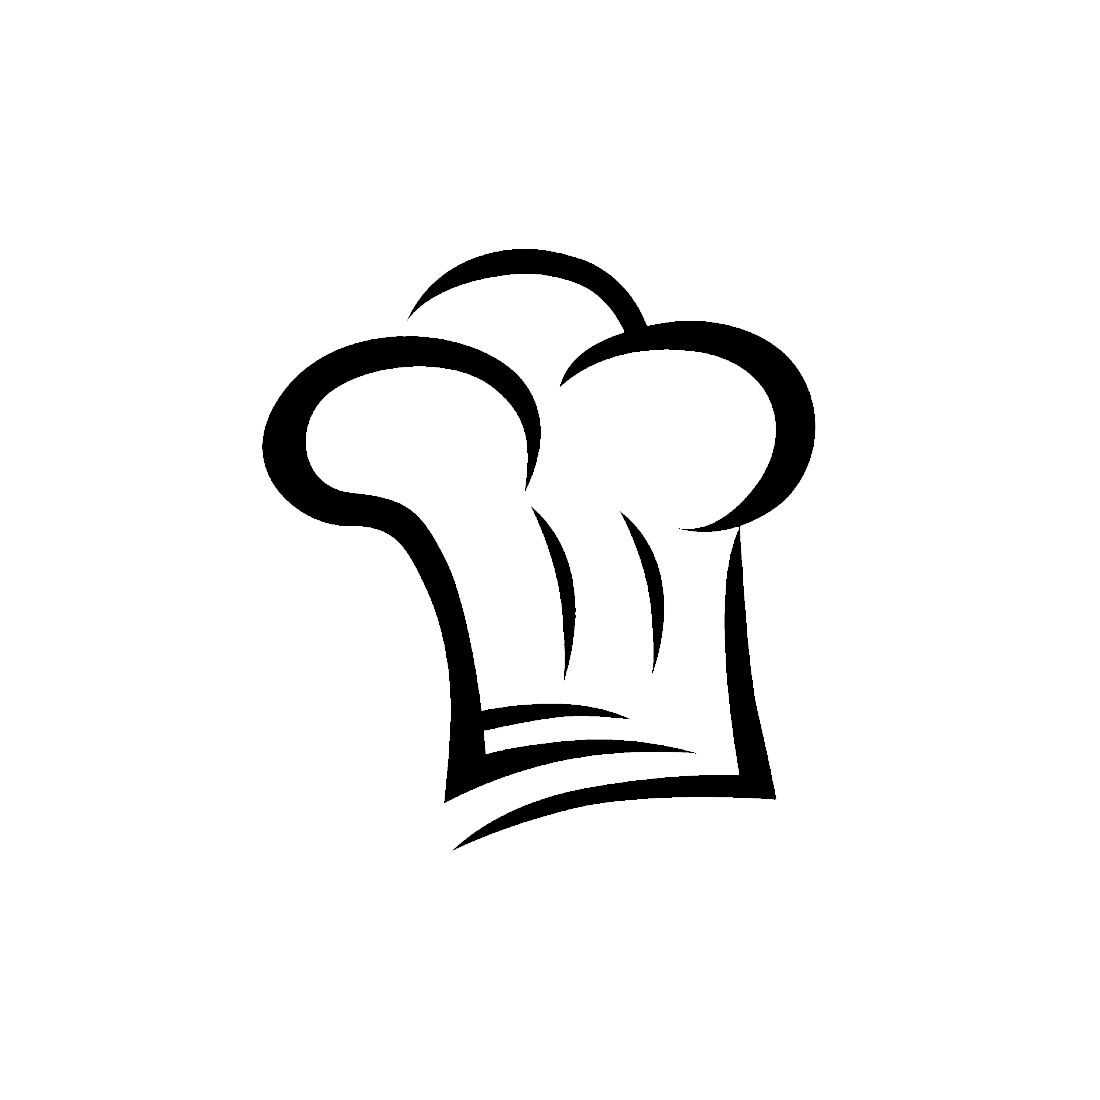 Black and white image of a chef hat.